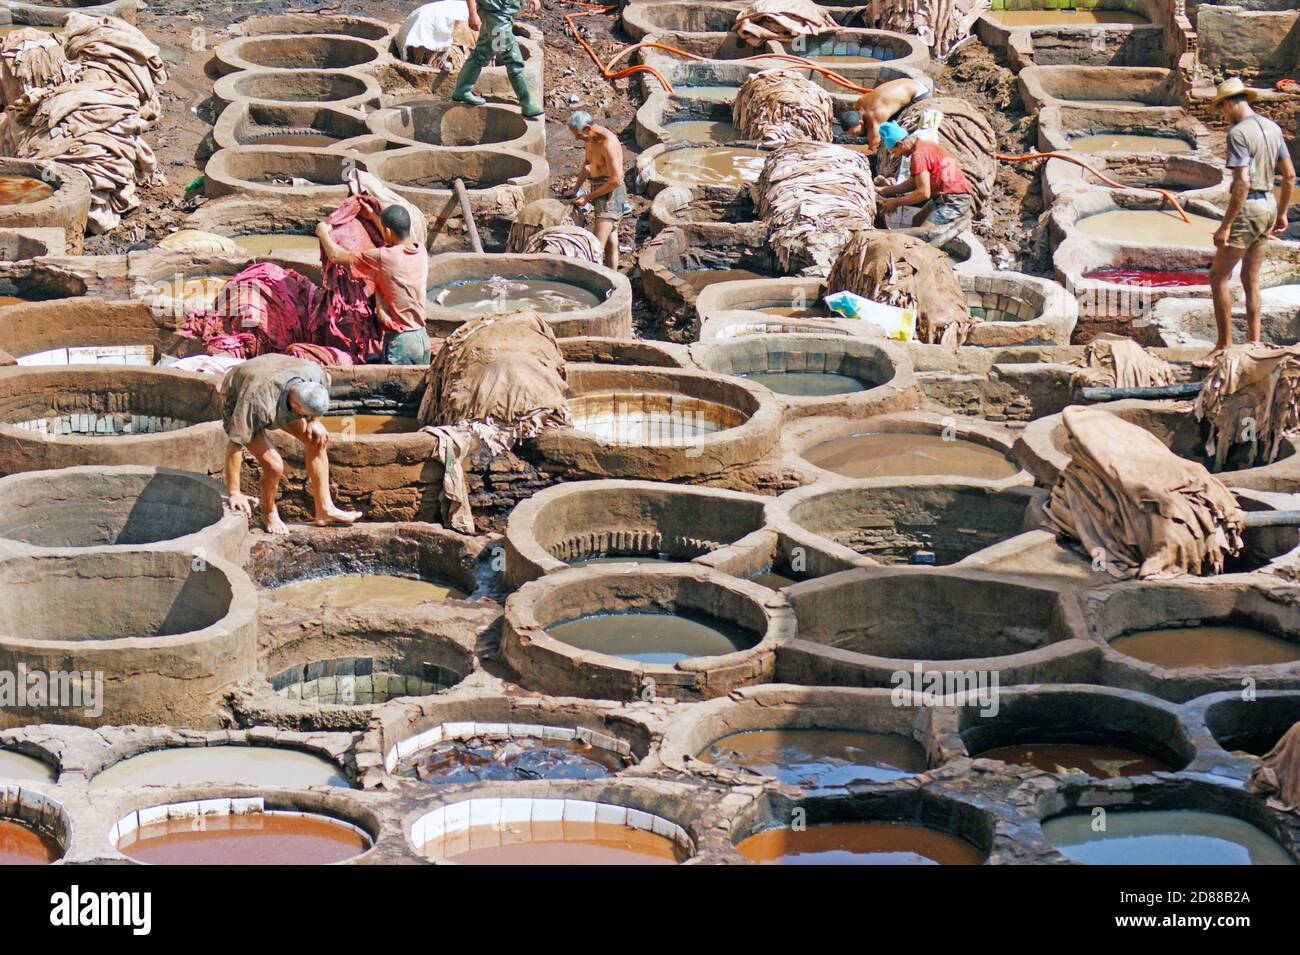 Manual laborers work the stone vats at the Chouara Tannery in Fez, Morocco where hides are softened and dyed for the leather industry. Stock Photo